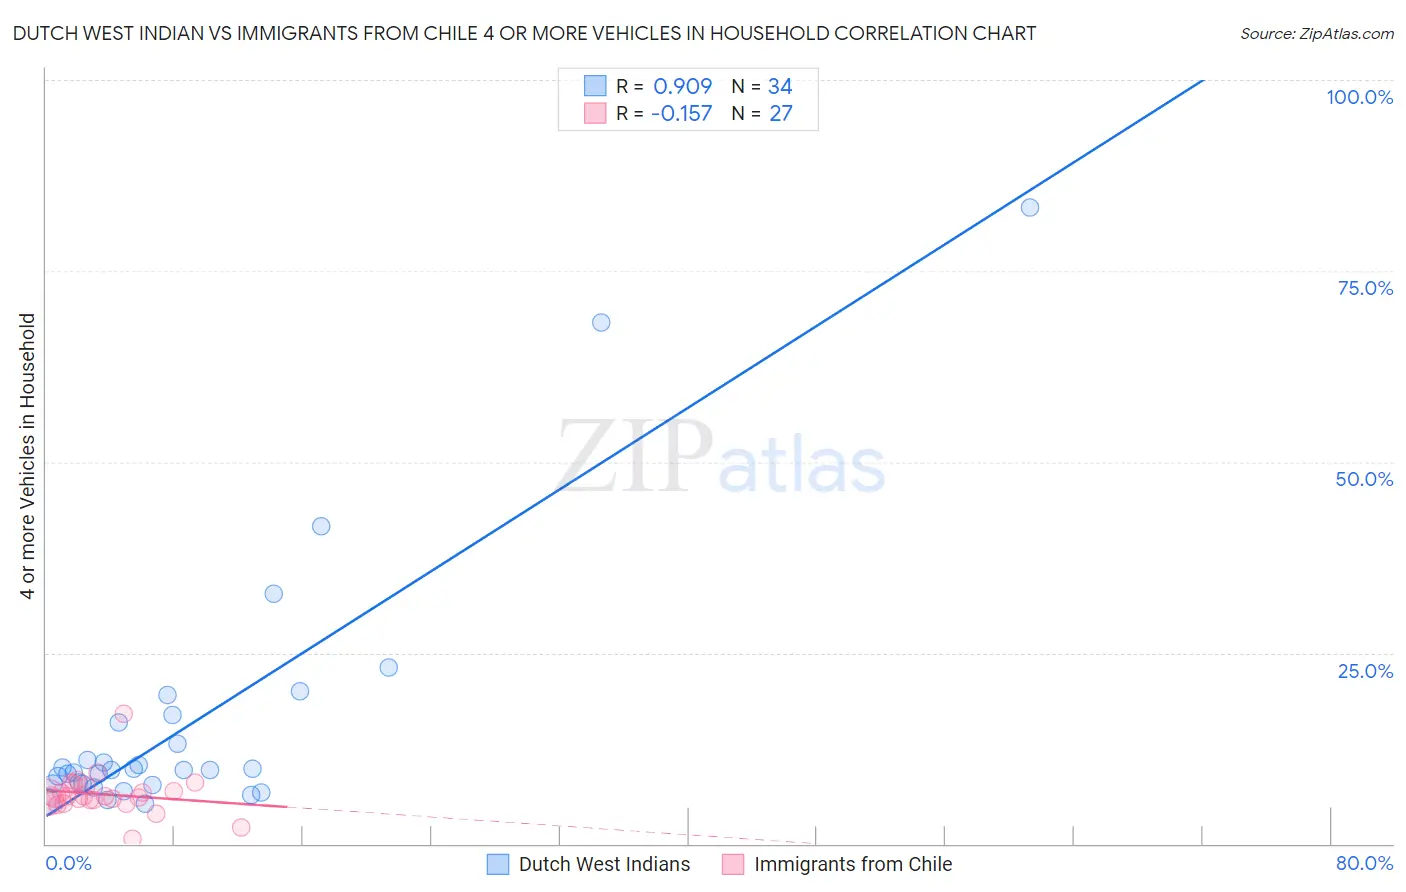 Dutch West Indian vs Immigrants from Chile 4 or more Vehicles in Household